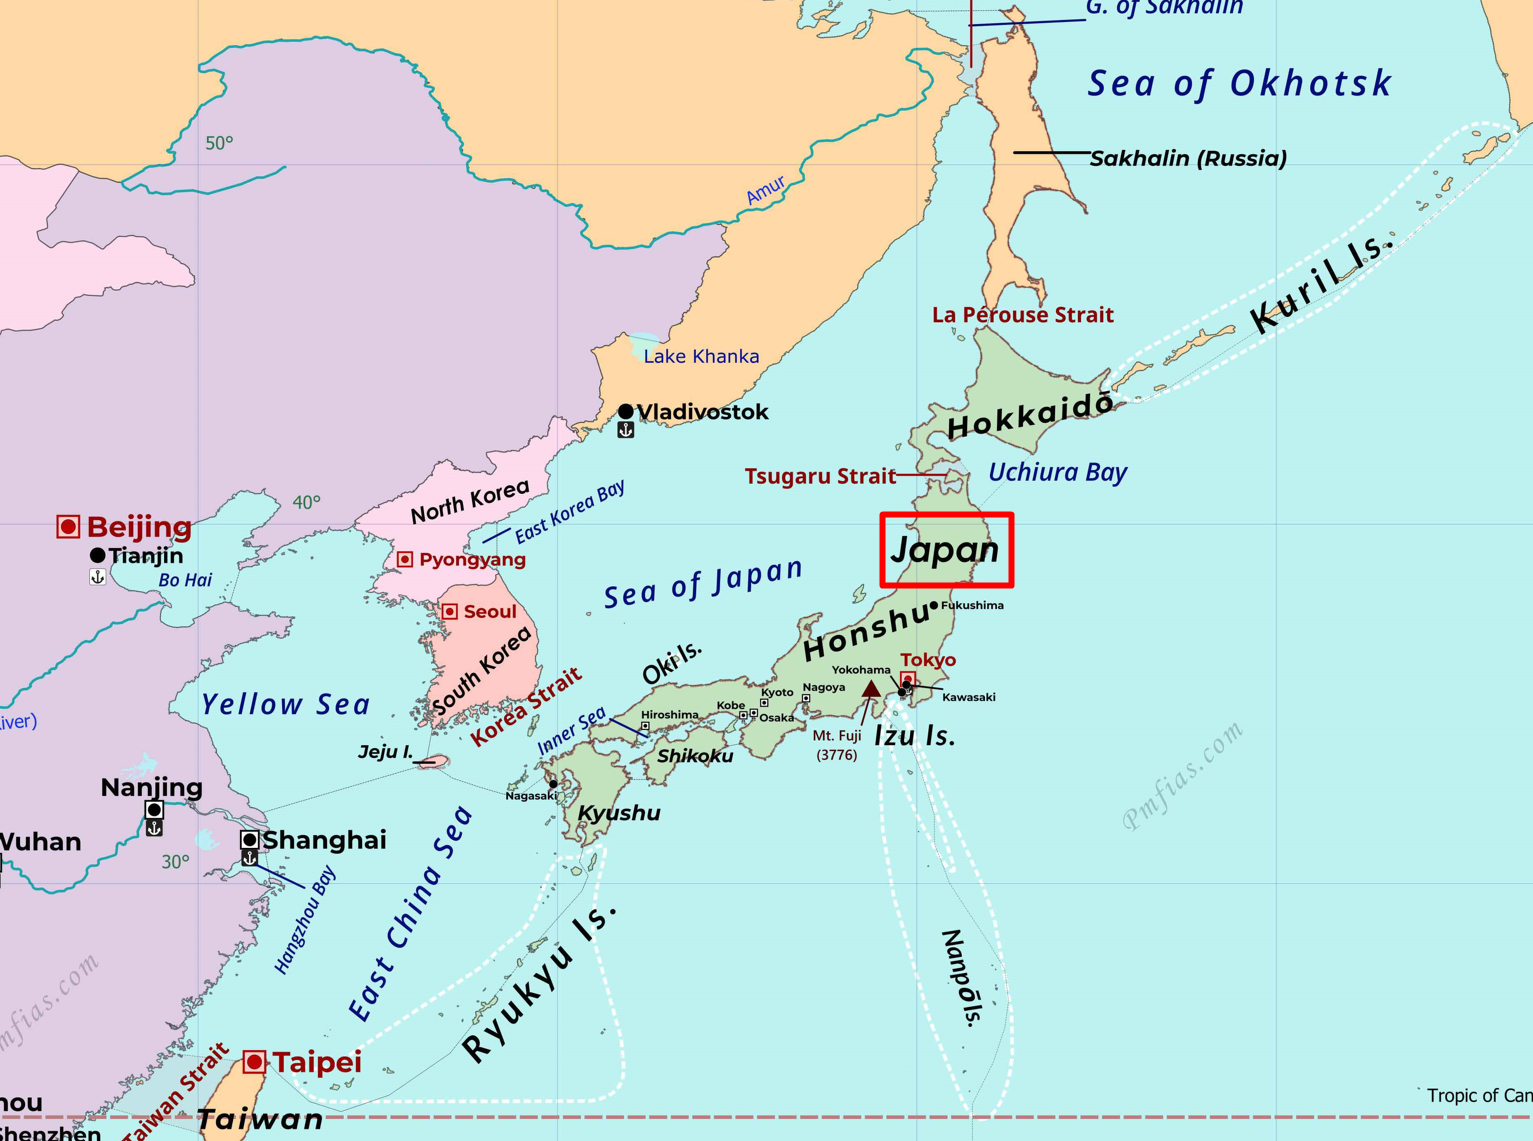 A map of japan with cities
Description automatically generated